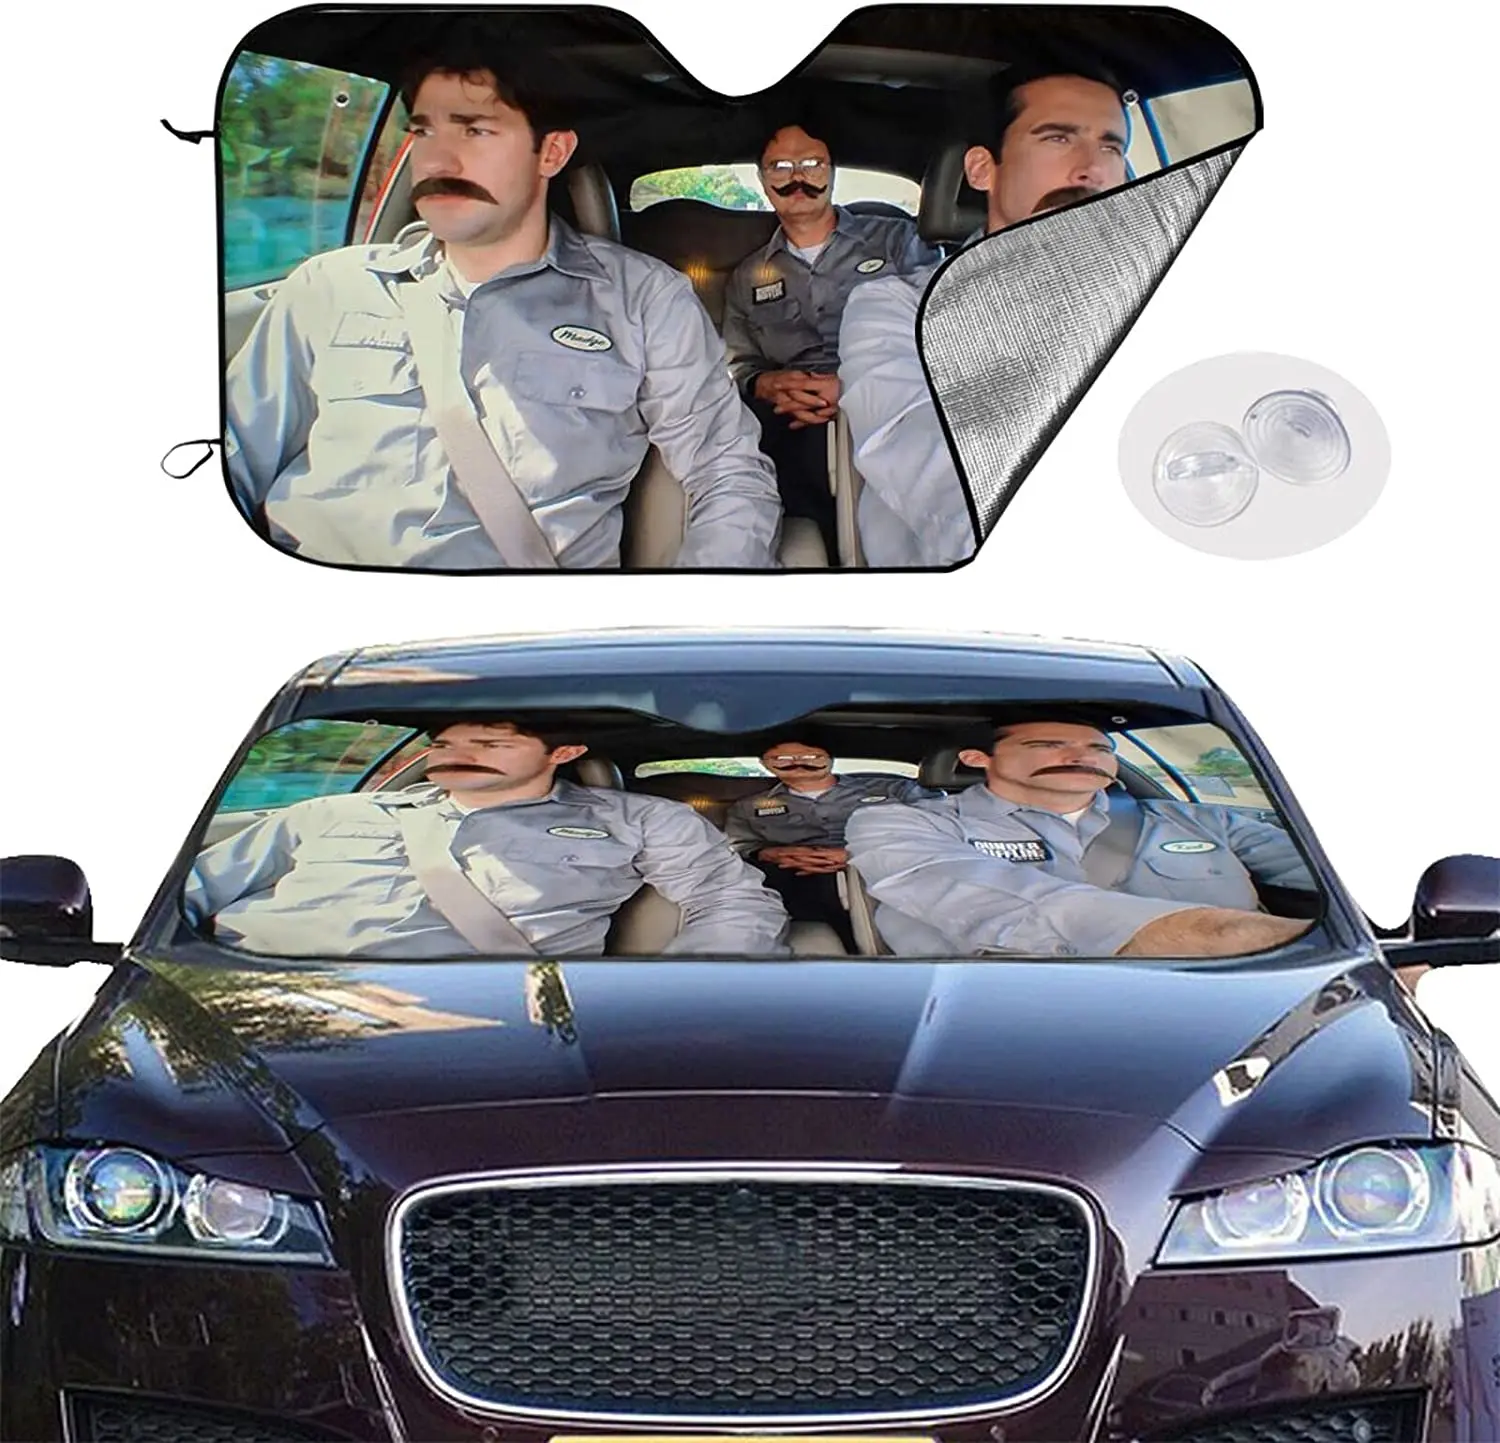 The Office Driving Funny Car Auto Sunshades Windshield Accessories